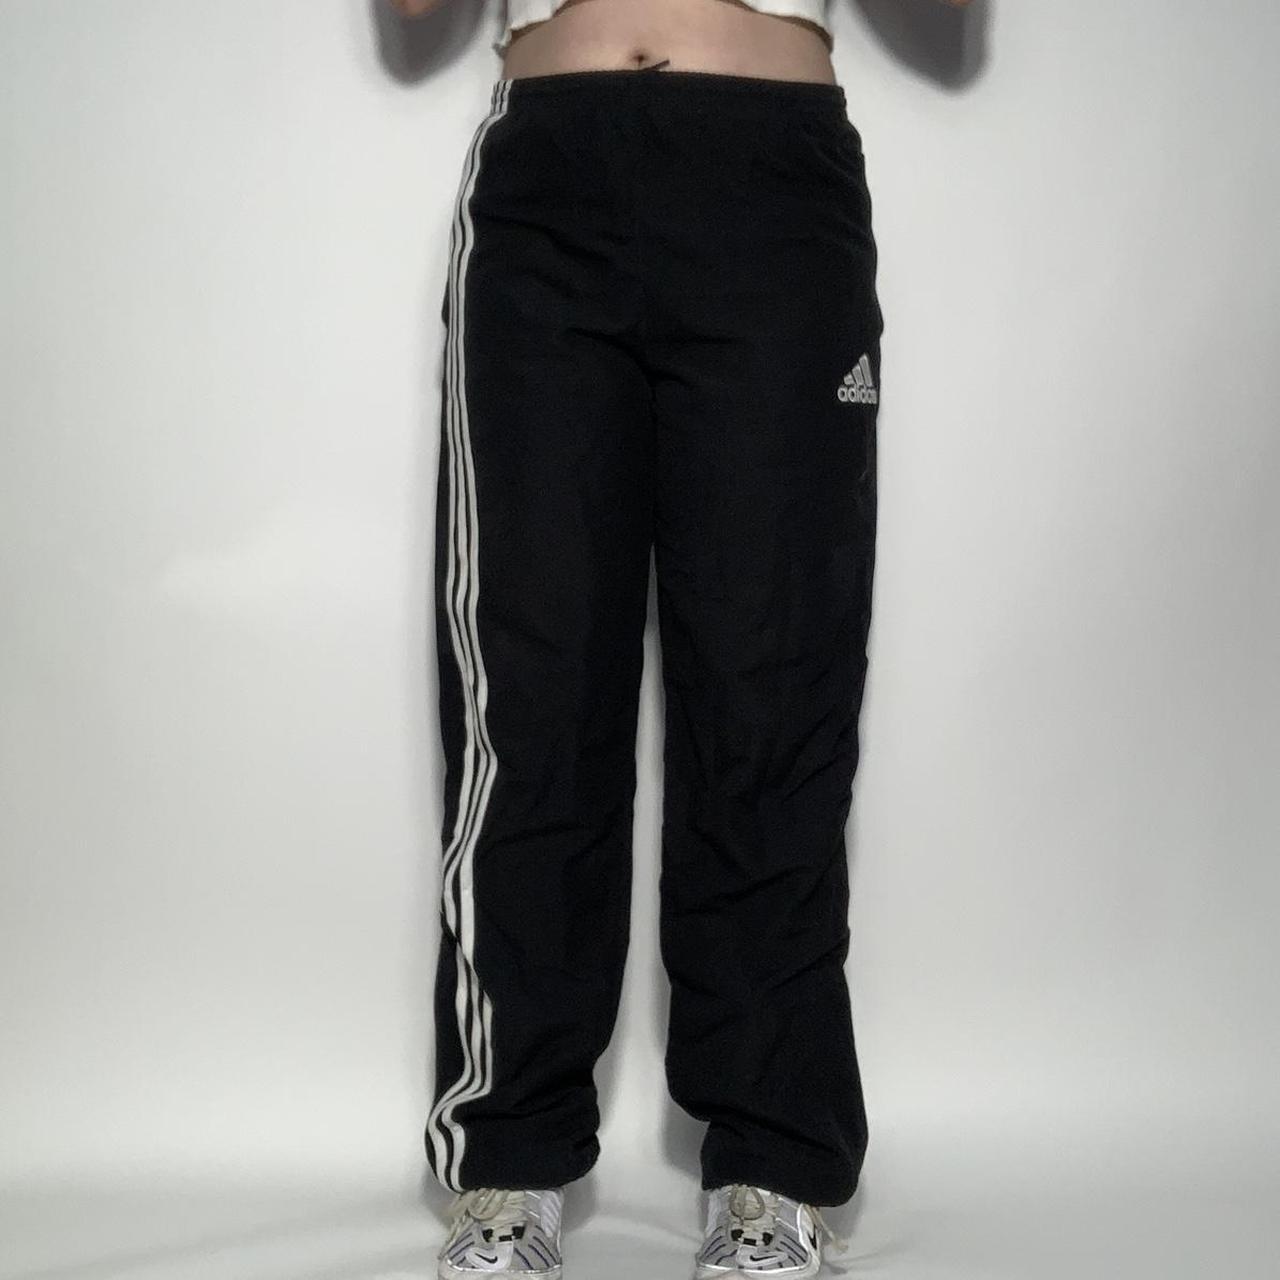 Vintage 90s Adidas unisex black and white baggy track pants